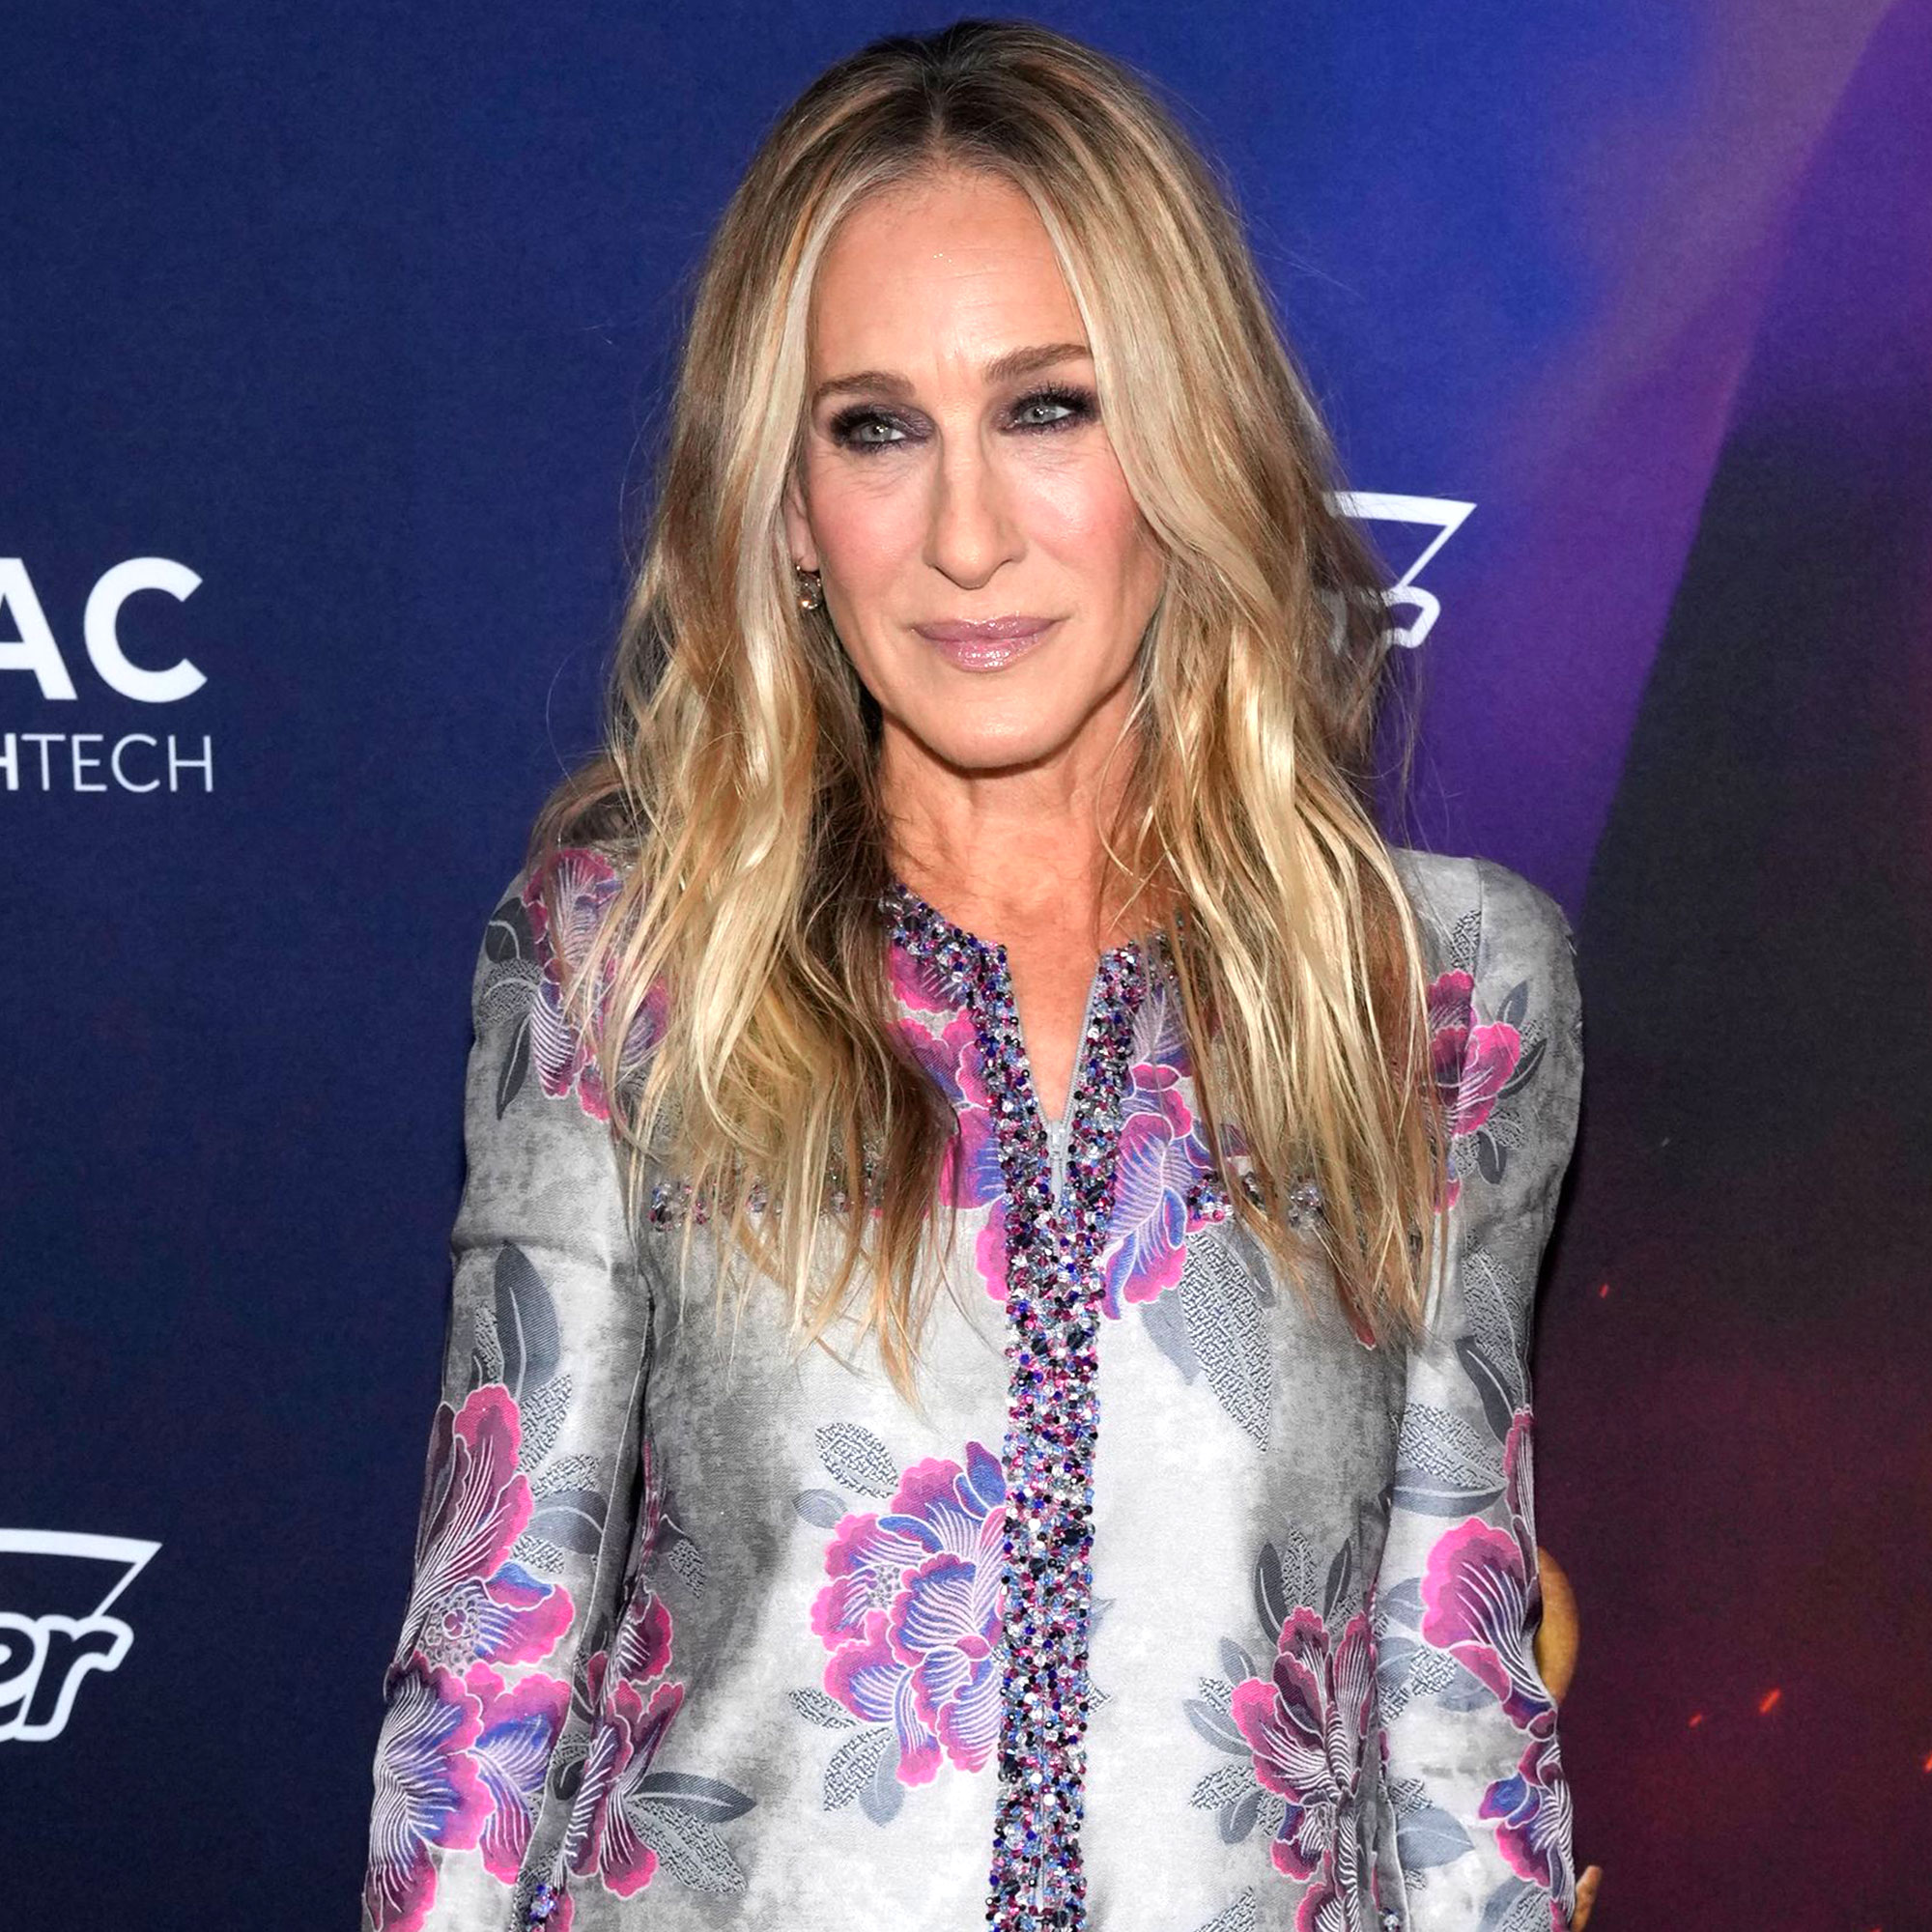 https://www.usmagazine.com/wp-content/uploads/2022/09/Sarah-Jessica-Parker-And-Just-Like-That-Season-2-About-Resilience.jpg?quality=47&strip=all